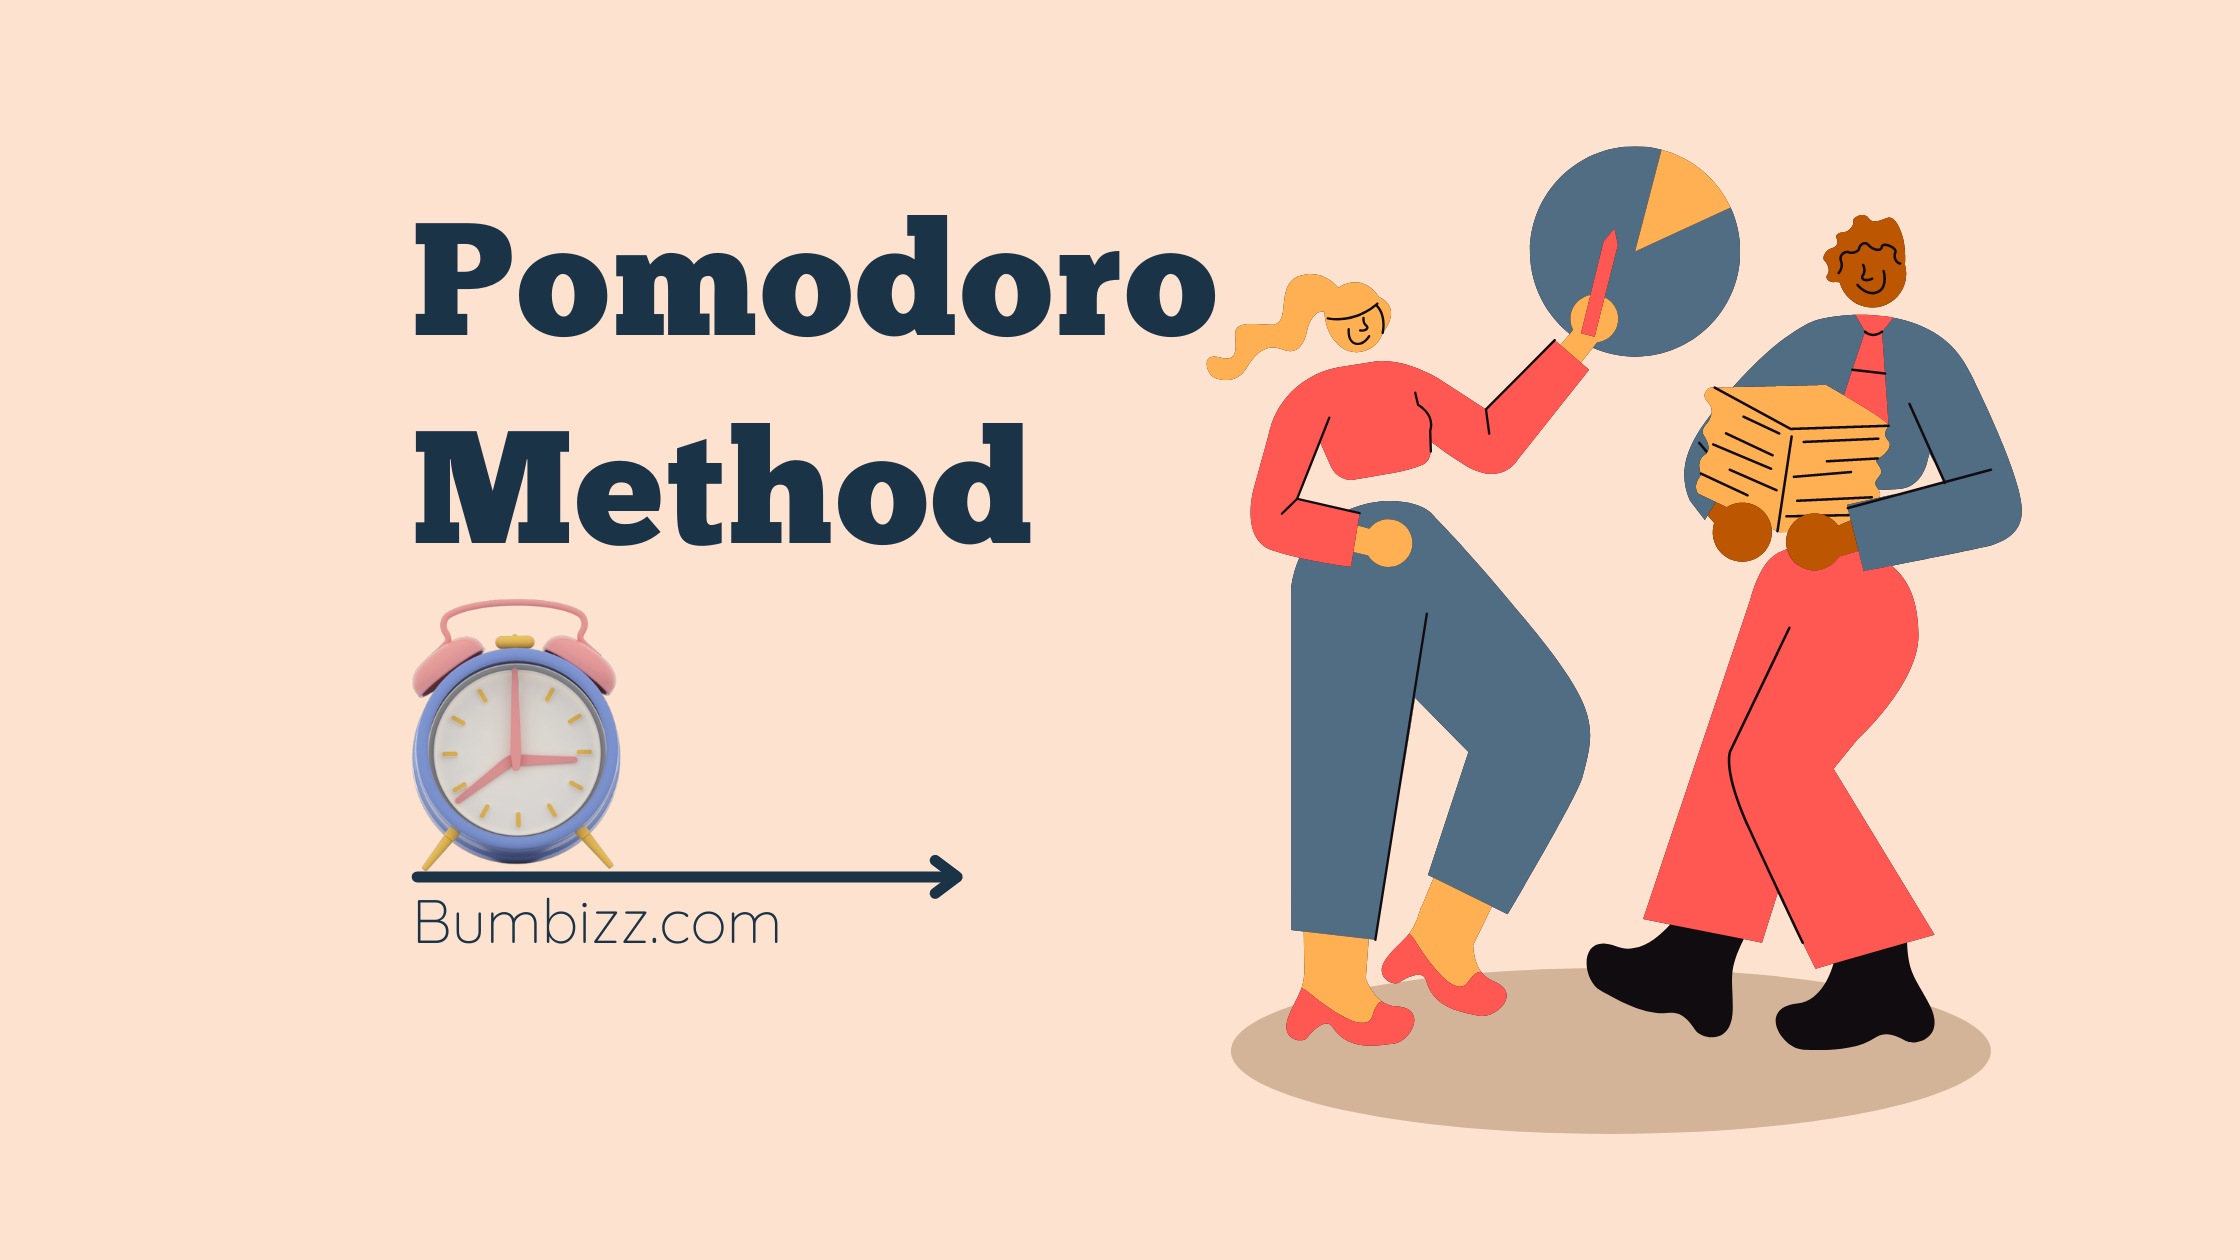 Pomodoro method: 10 applications to implement it